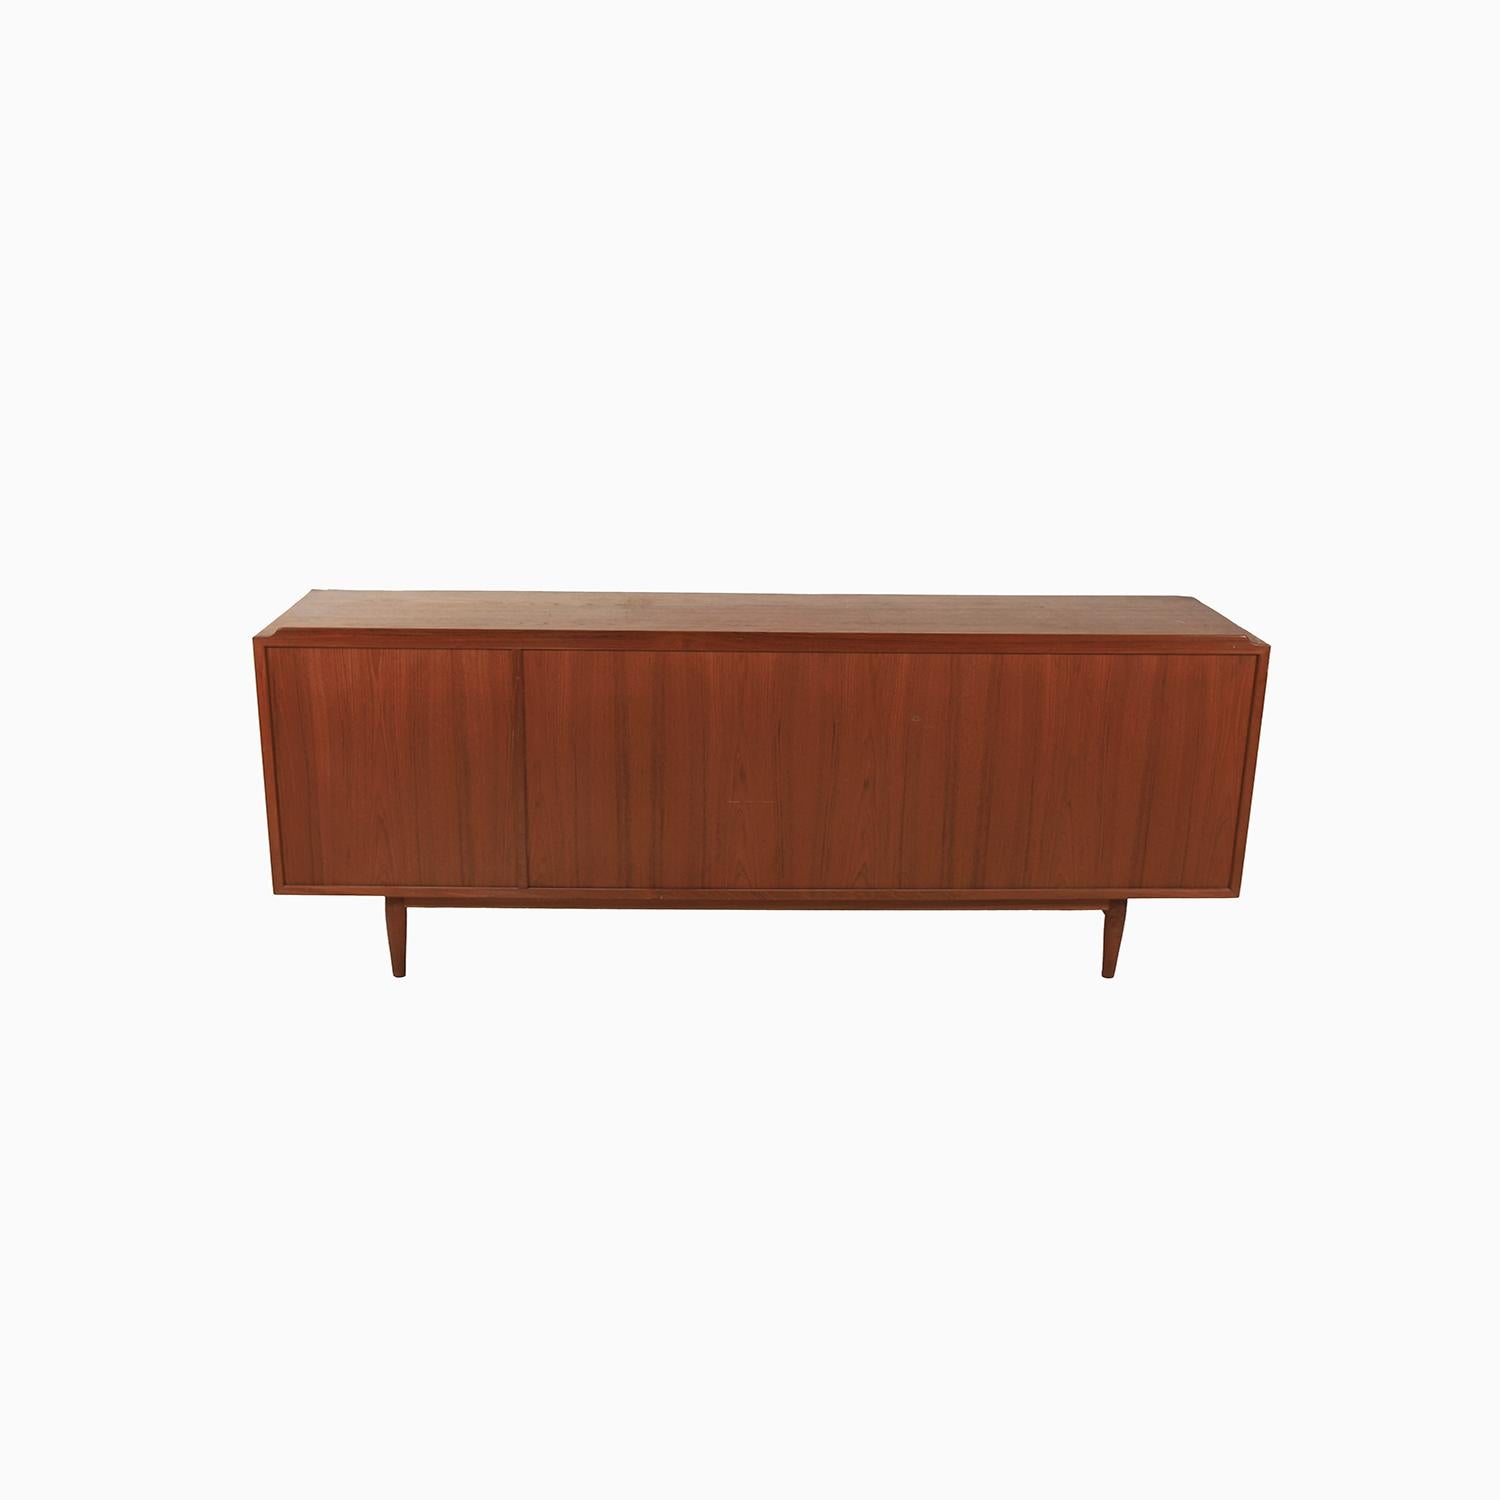 An iconic sideboard designed by Arne Vodder for Sibast. Teak cabinet with reversible doors. Lots of storage behind the sliding doors with a right bank of vertical drawers. An eye catching piece of Danish design.

Professional, skilled furniture